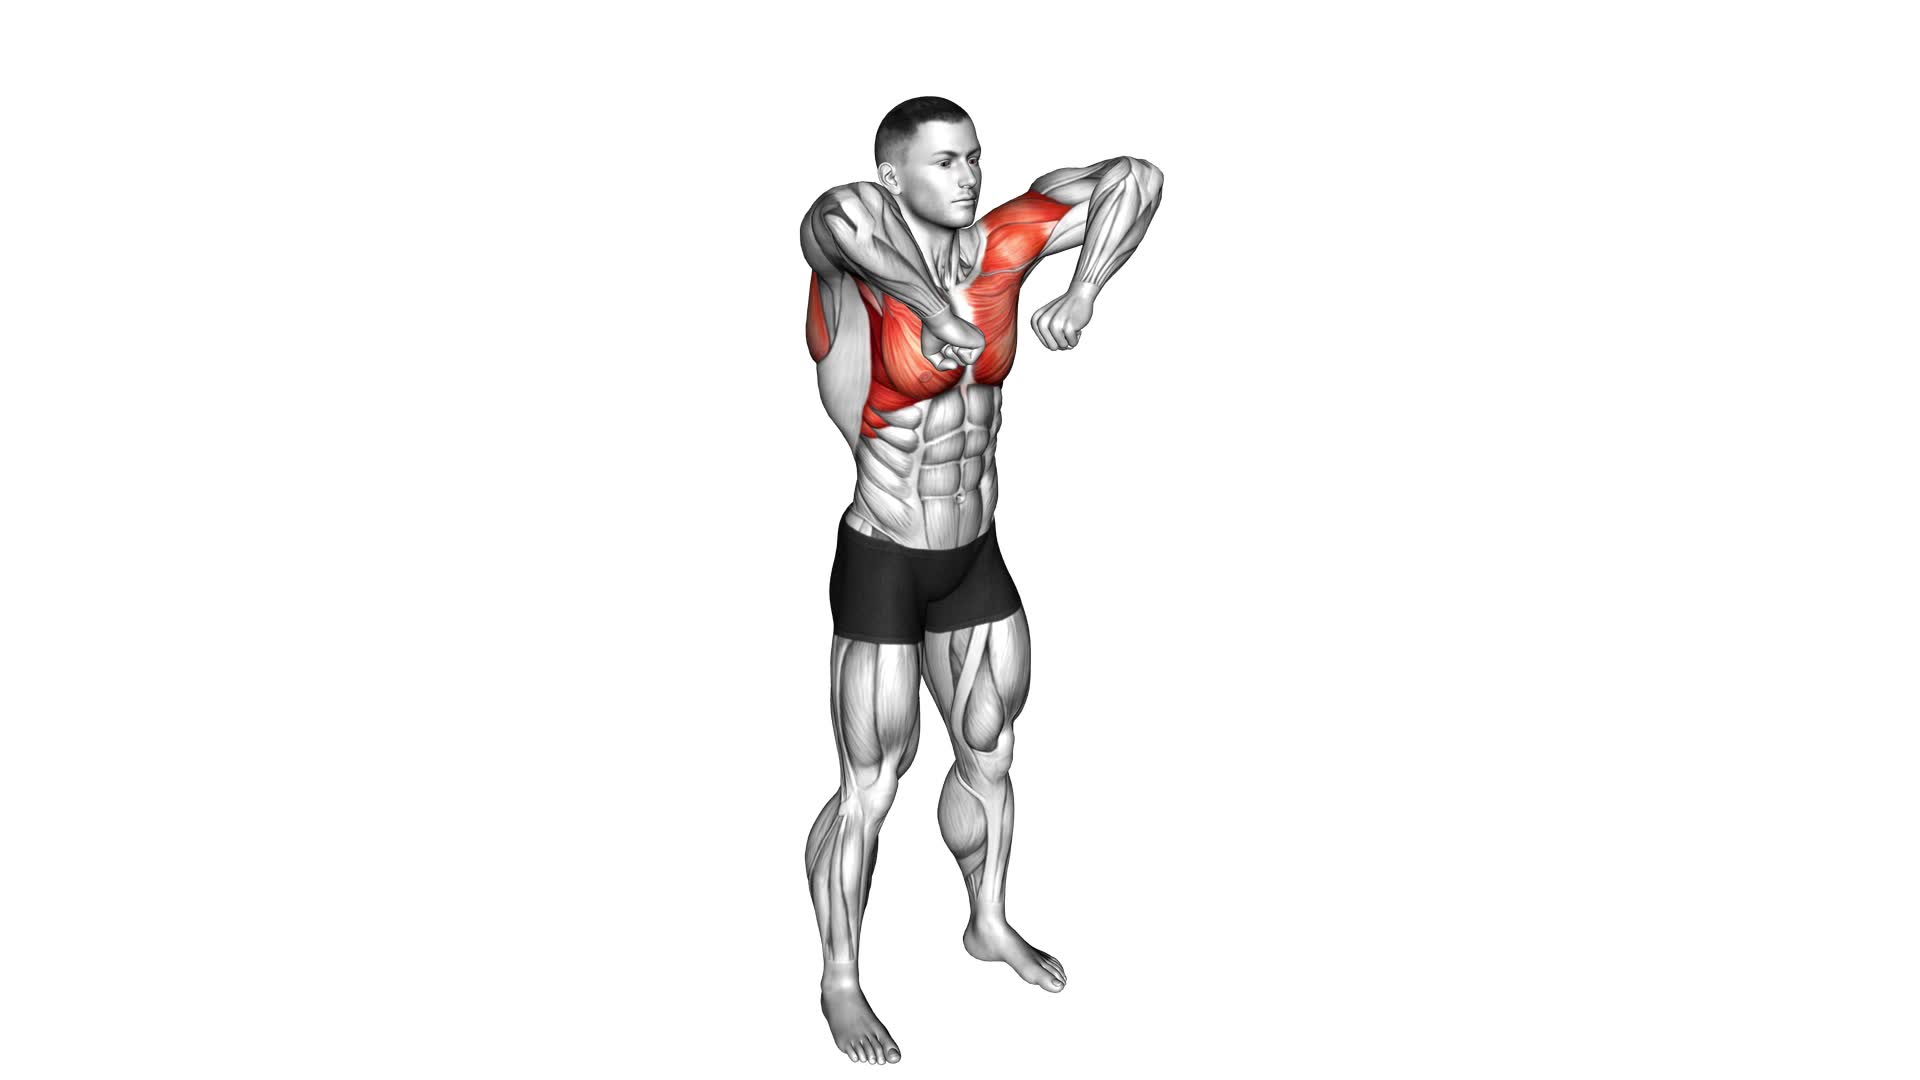 Elbow Touch and Lift (male) - Video Exercise Guide & Tips